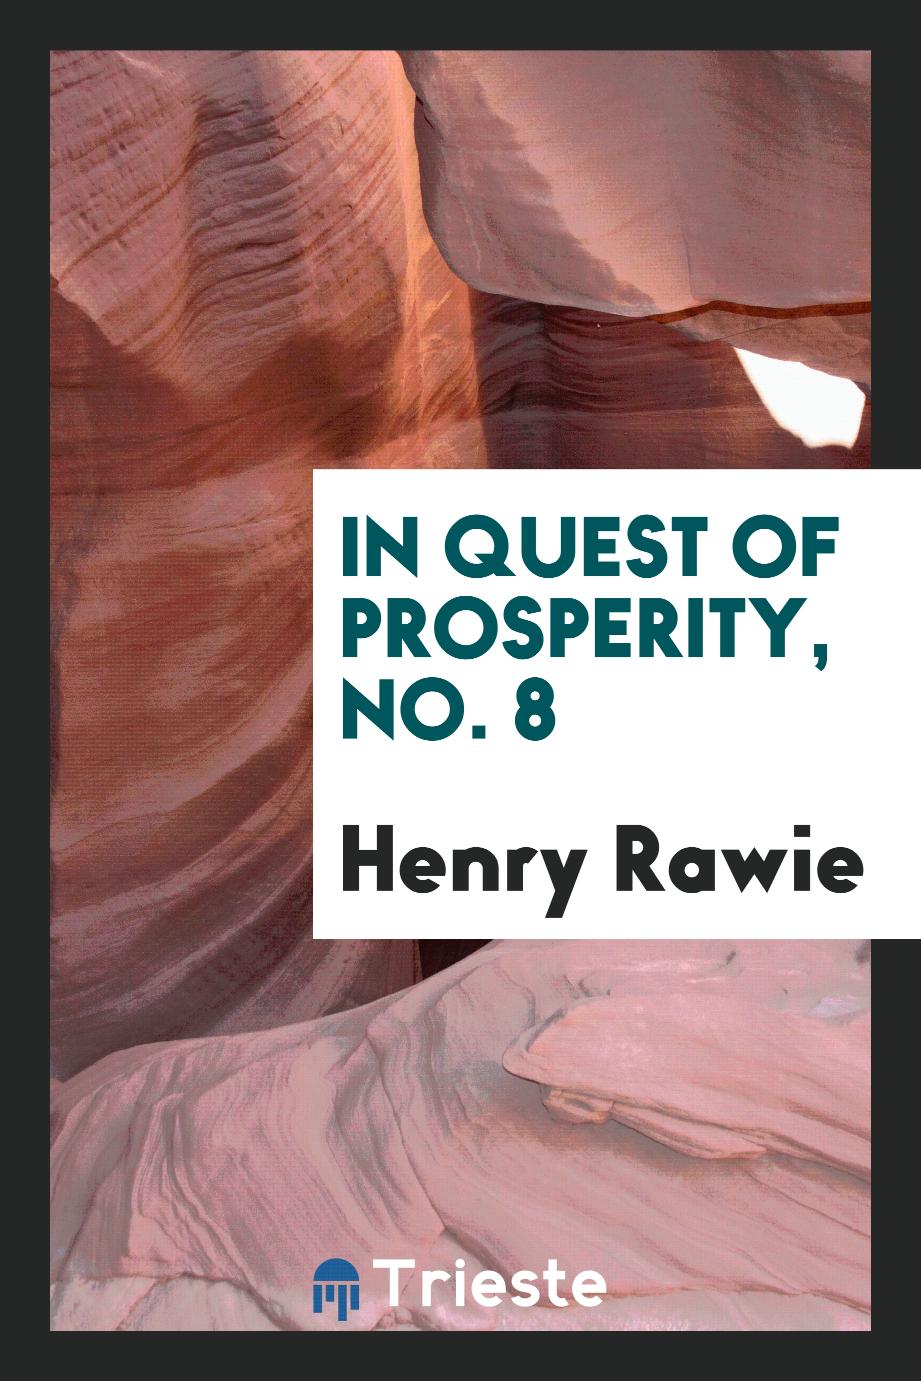 In quest of prosperity, No. 8